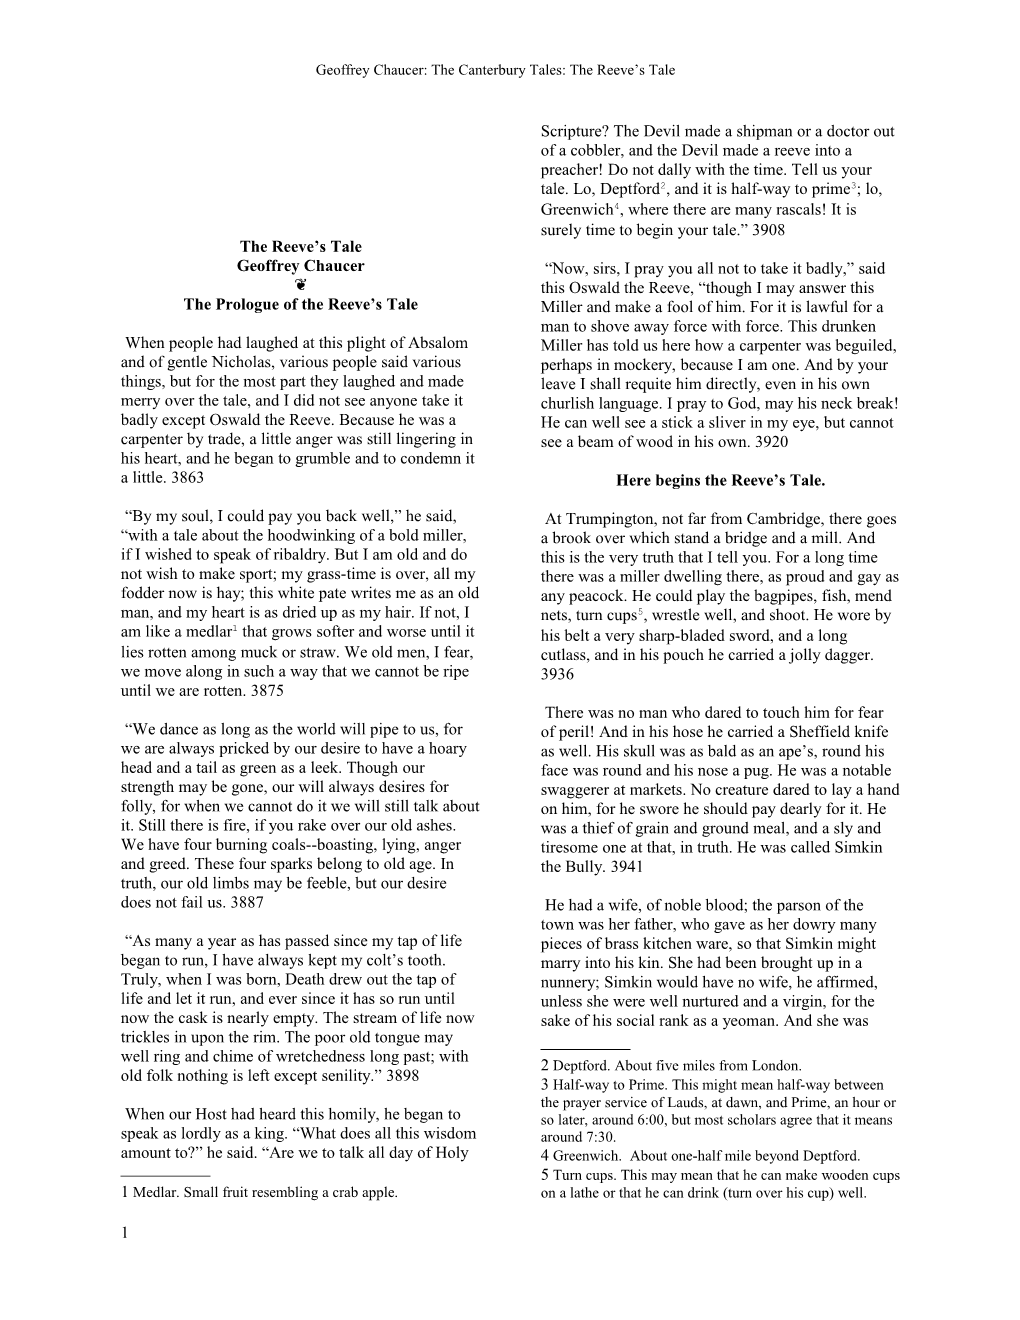 The Prologue of the Reeve' Tale